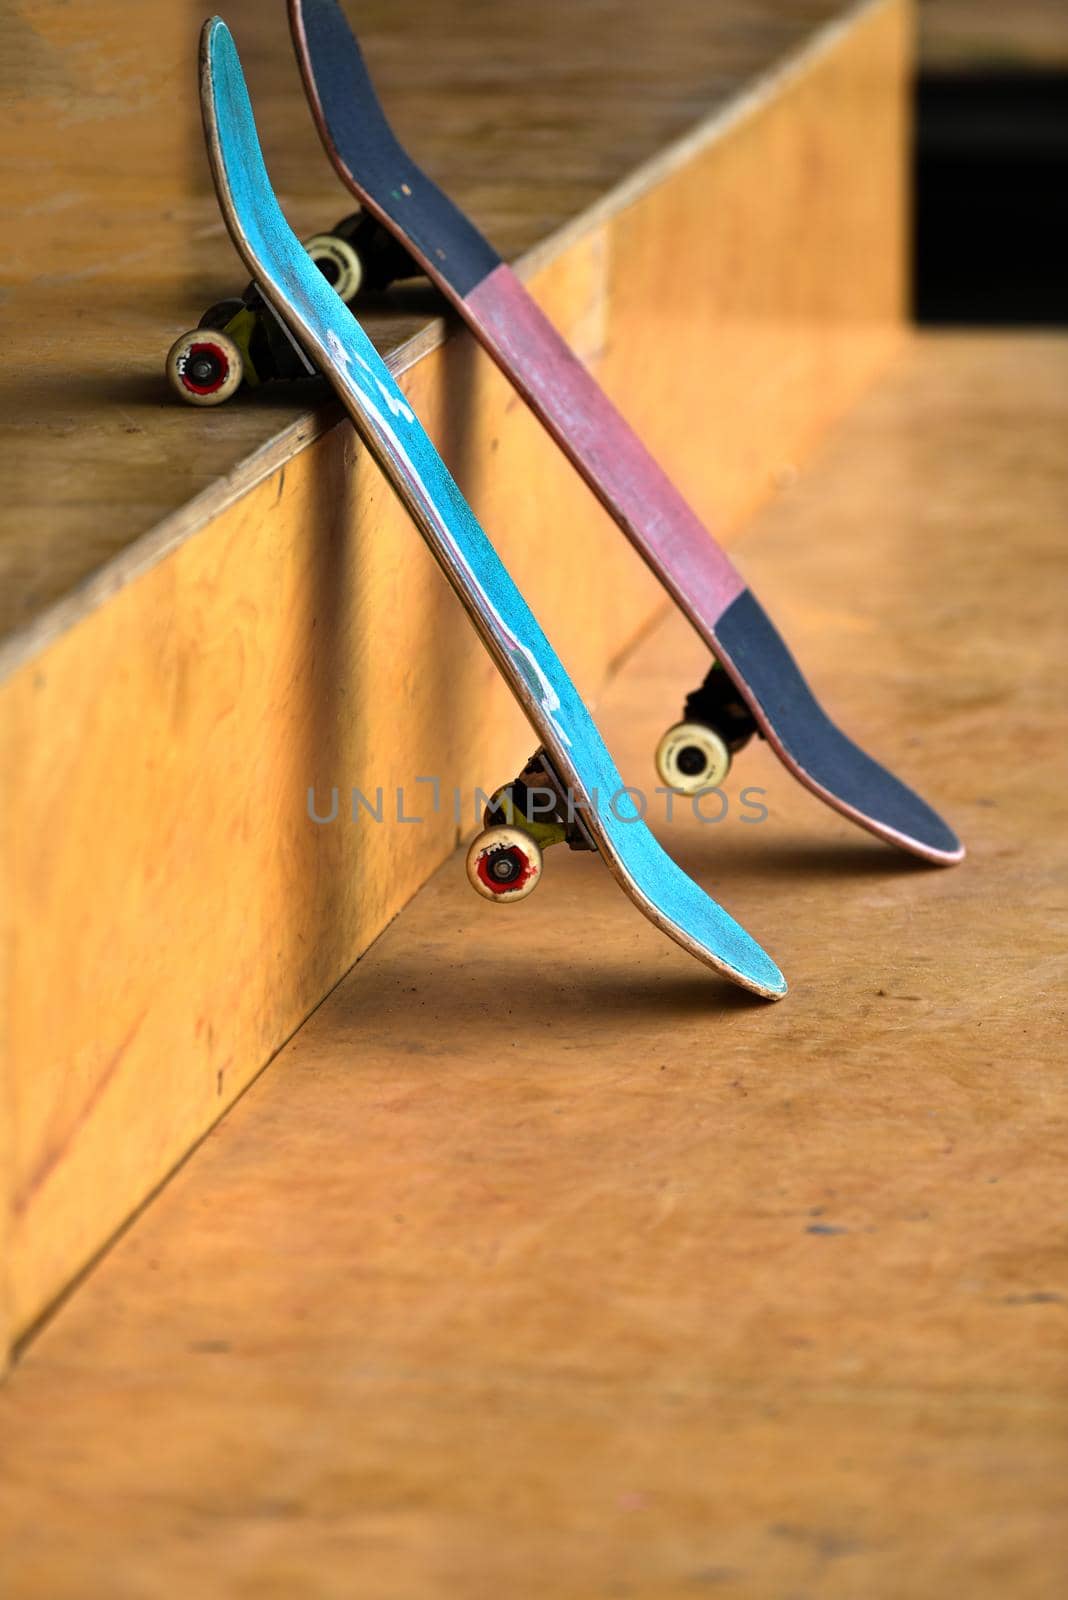 Skateboards for parkour practice on flat surface of large stadium or sports activity area. two shabby skateboards are tilted. worn, old, skateboards for teens